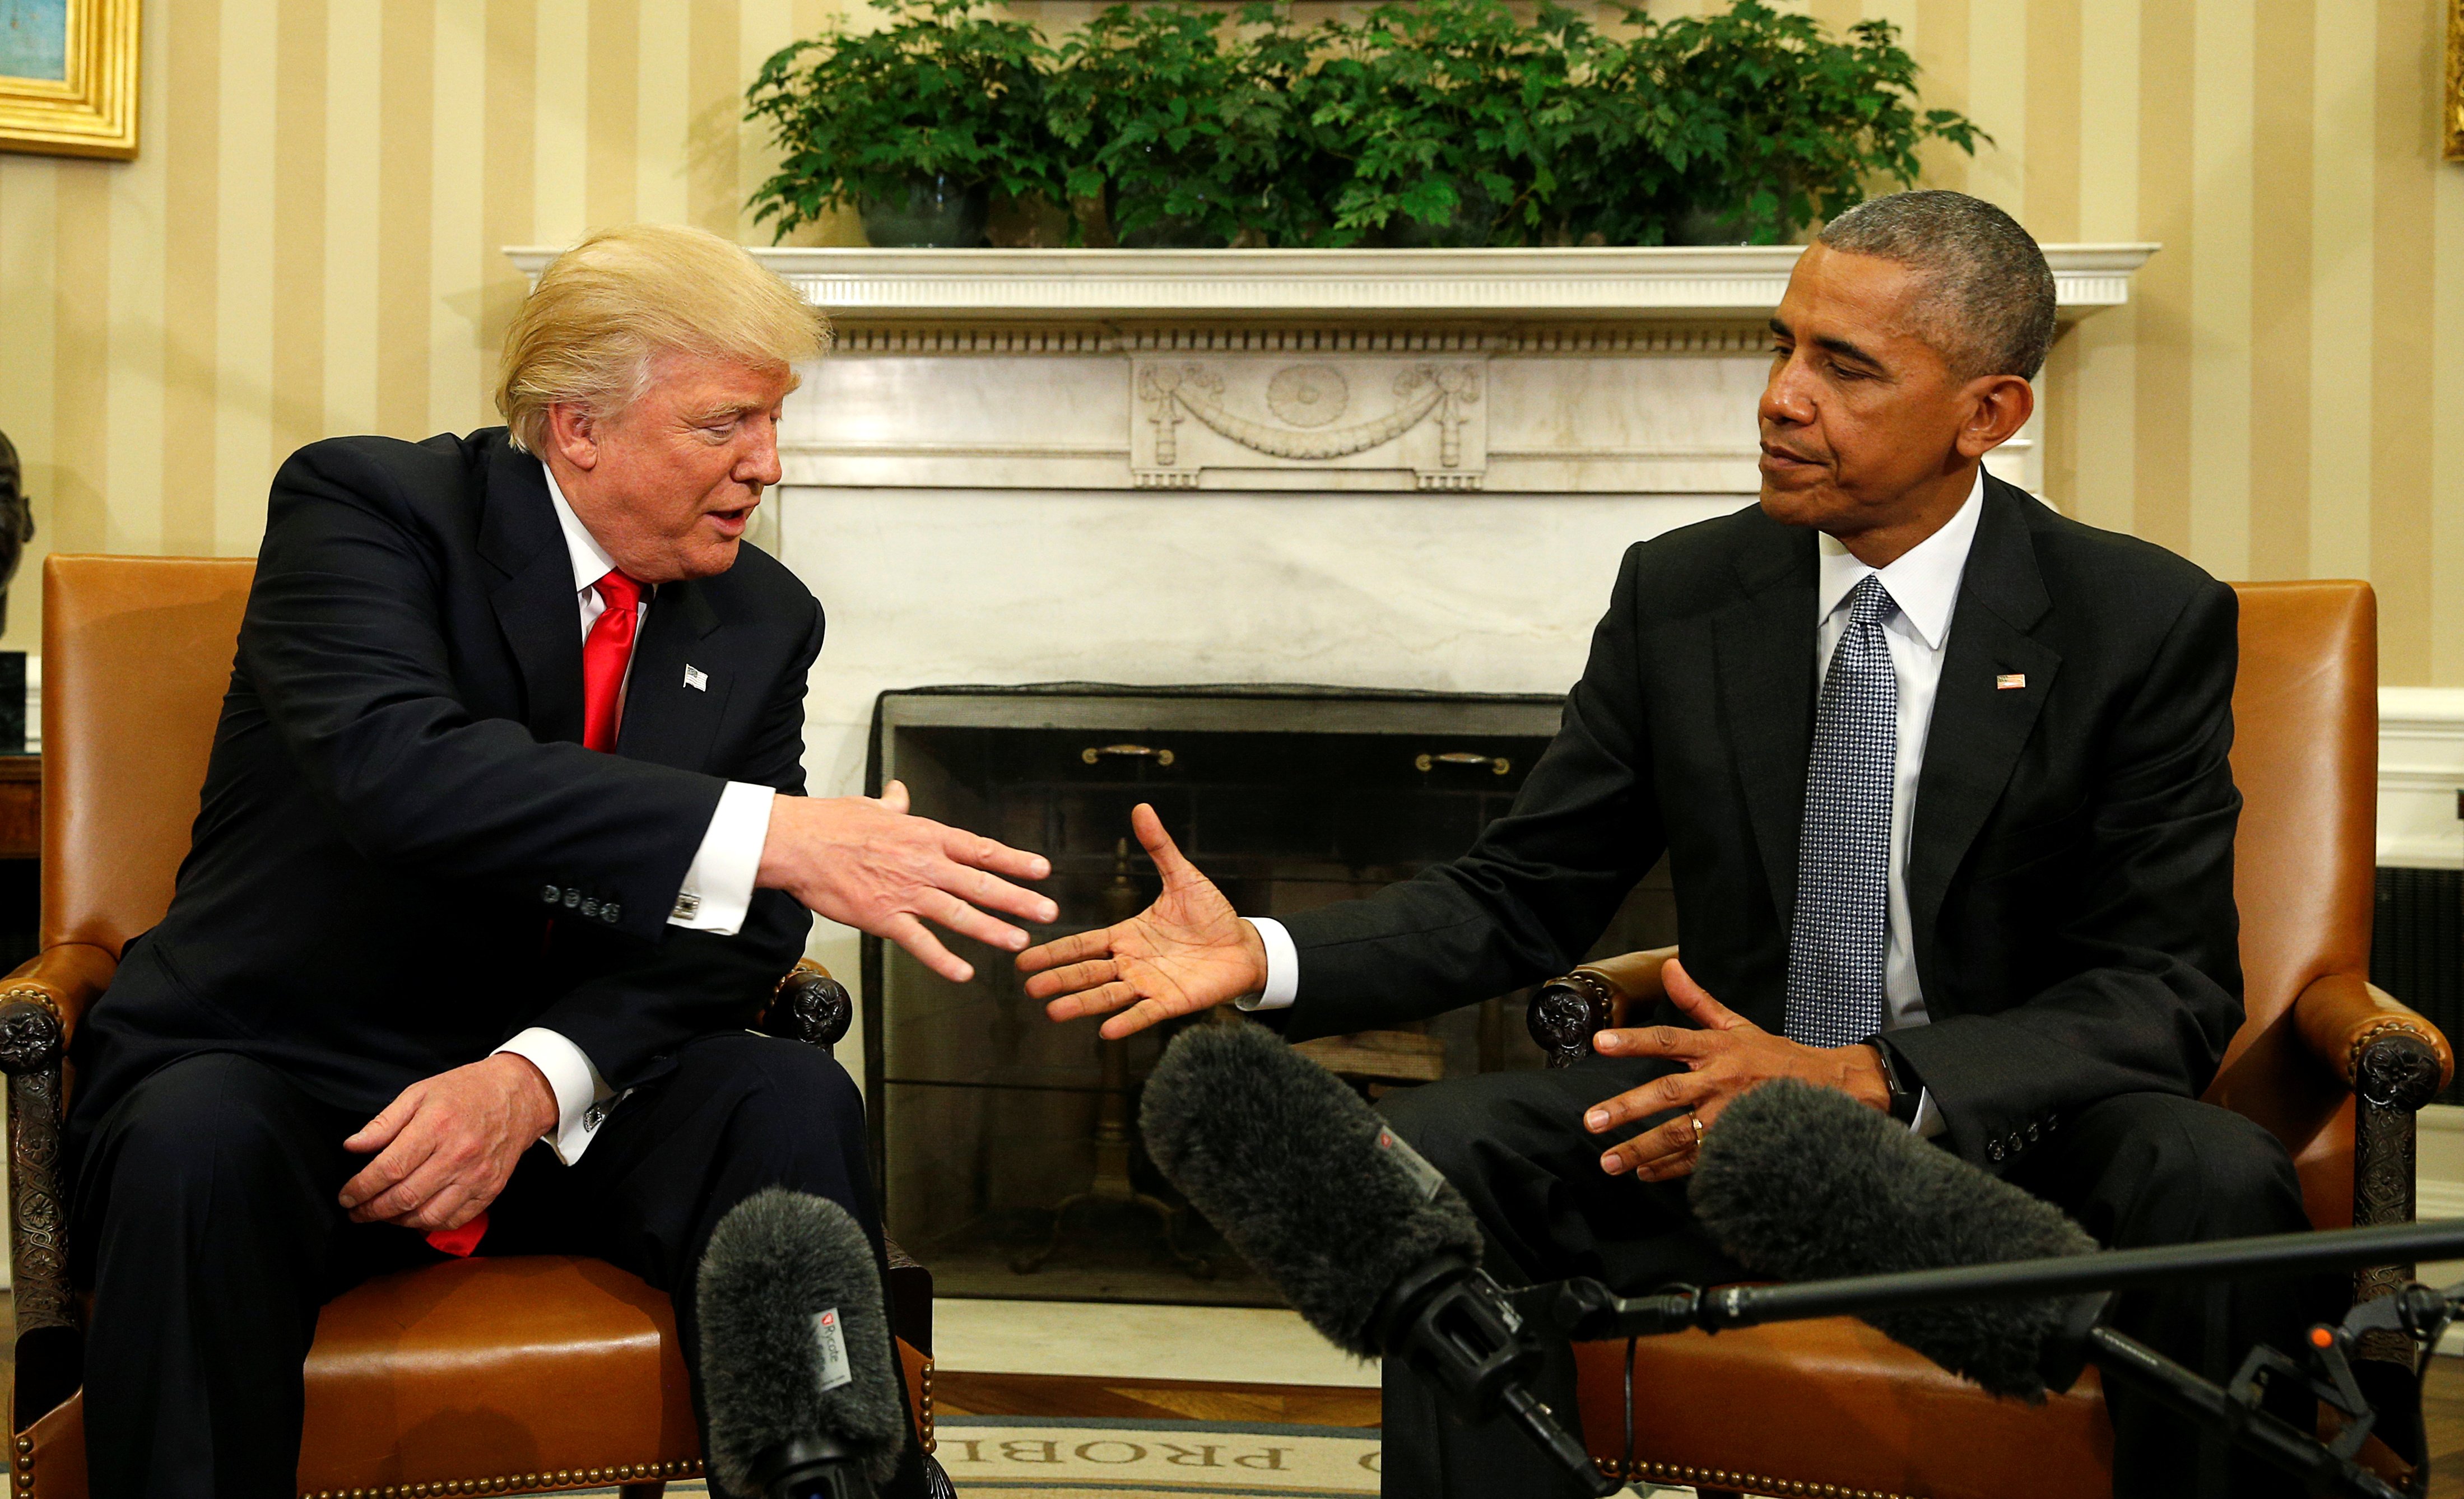 Obama meets with Trump at the White House in Washington